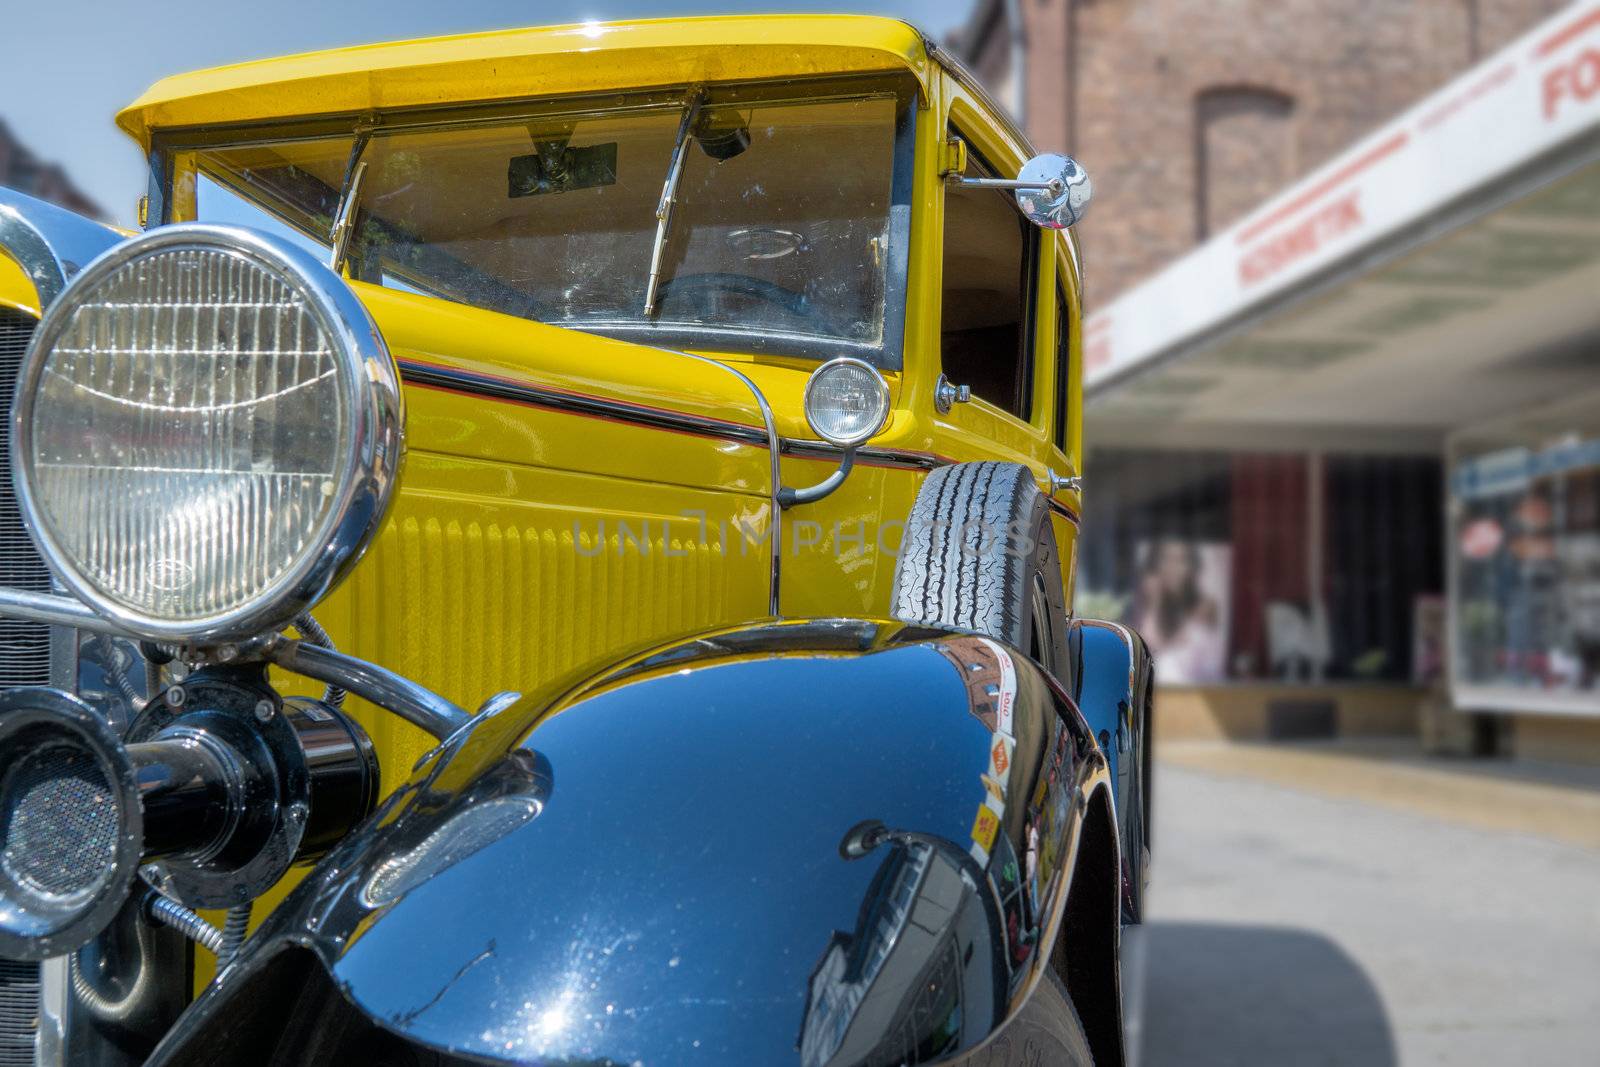 Wolfsburg, Lower Saxony, Germany, May 26., 2018: Yellow historic car in close-up view diagonally from the front, with black fenders, side parts with ventilation slots and small windscreen wipers, Oldtimer Festival, Germany